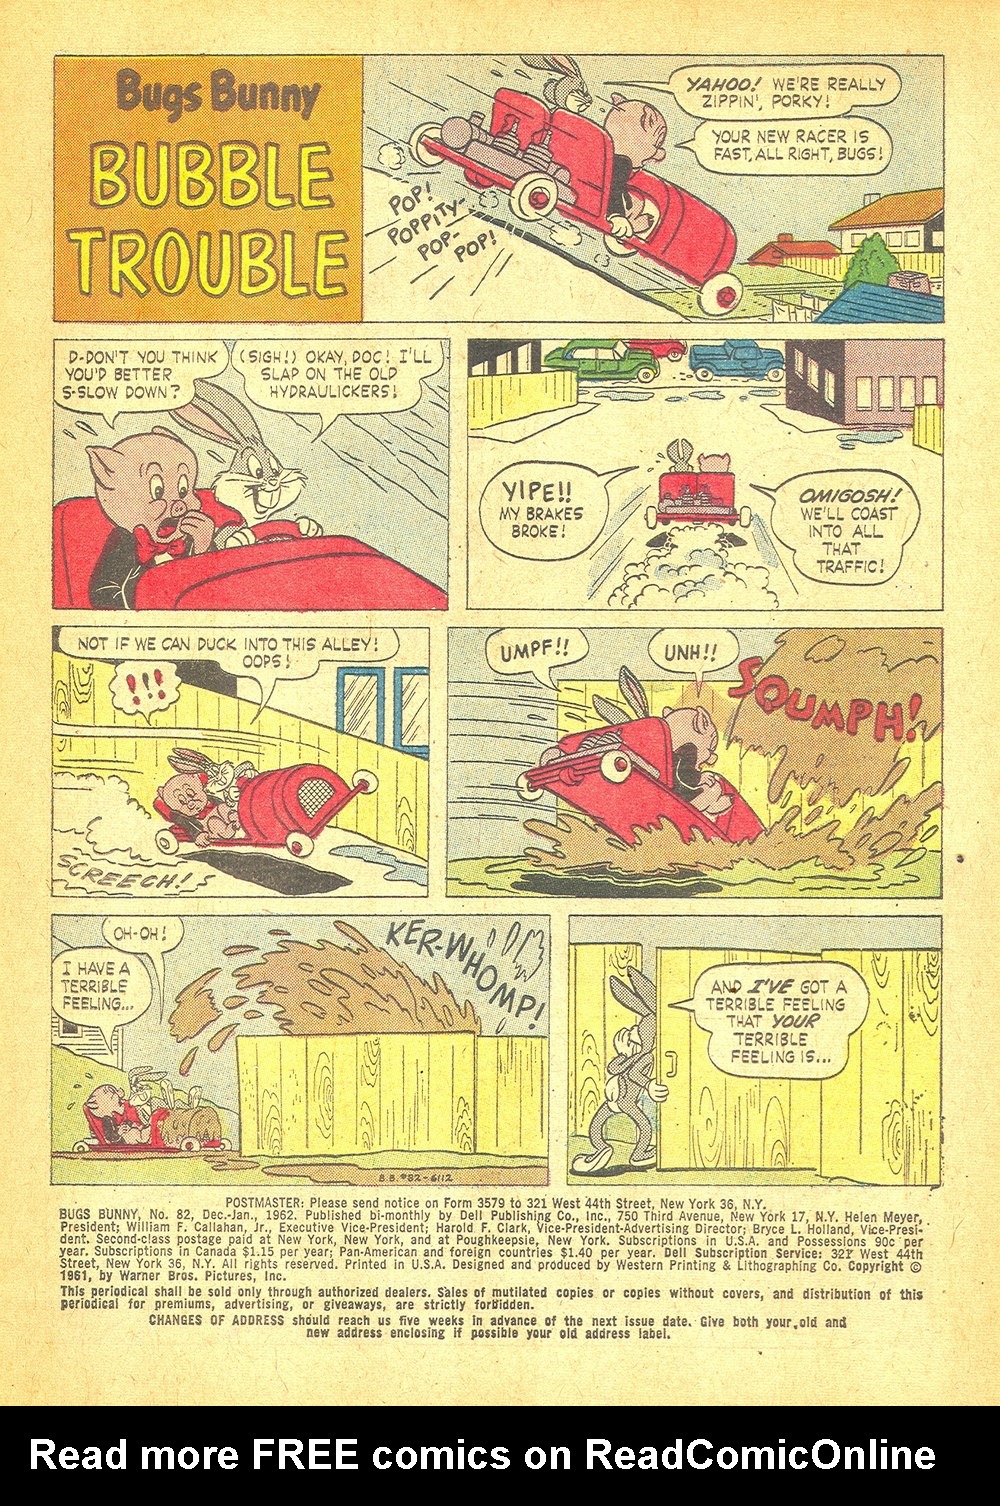 Read online Bugs Bunny comic -  Issue #82 - 3